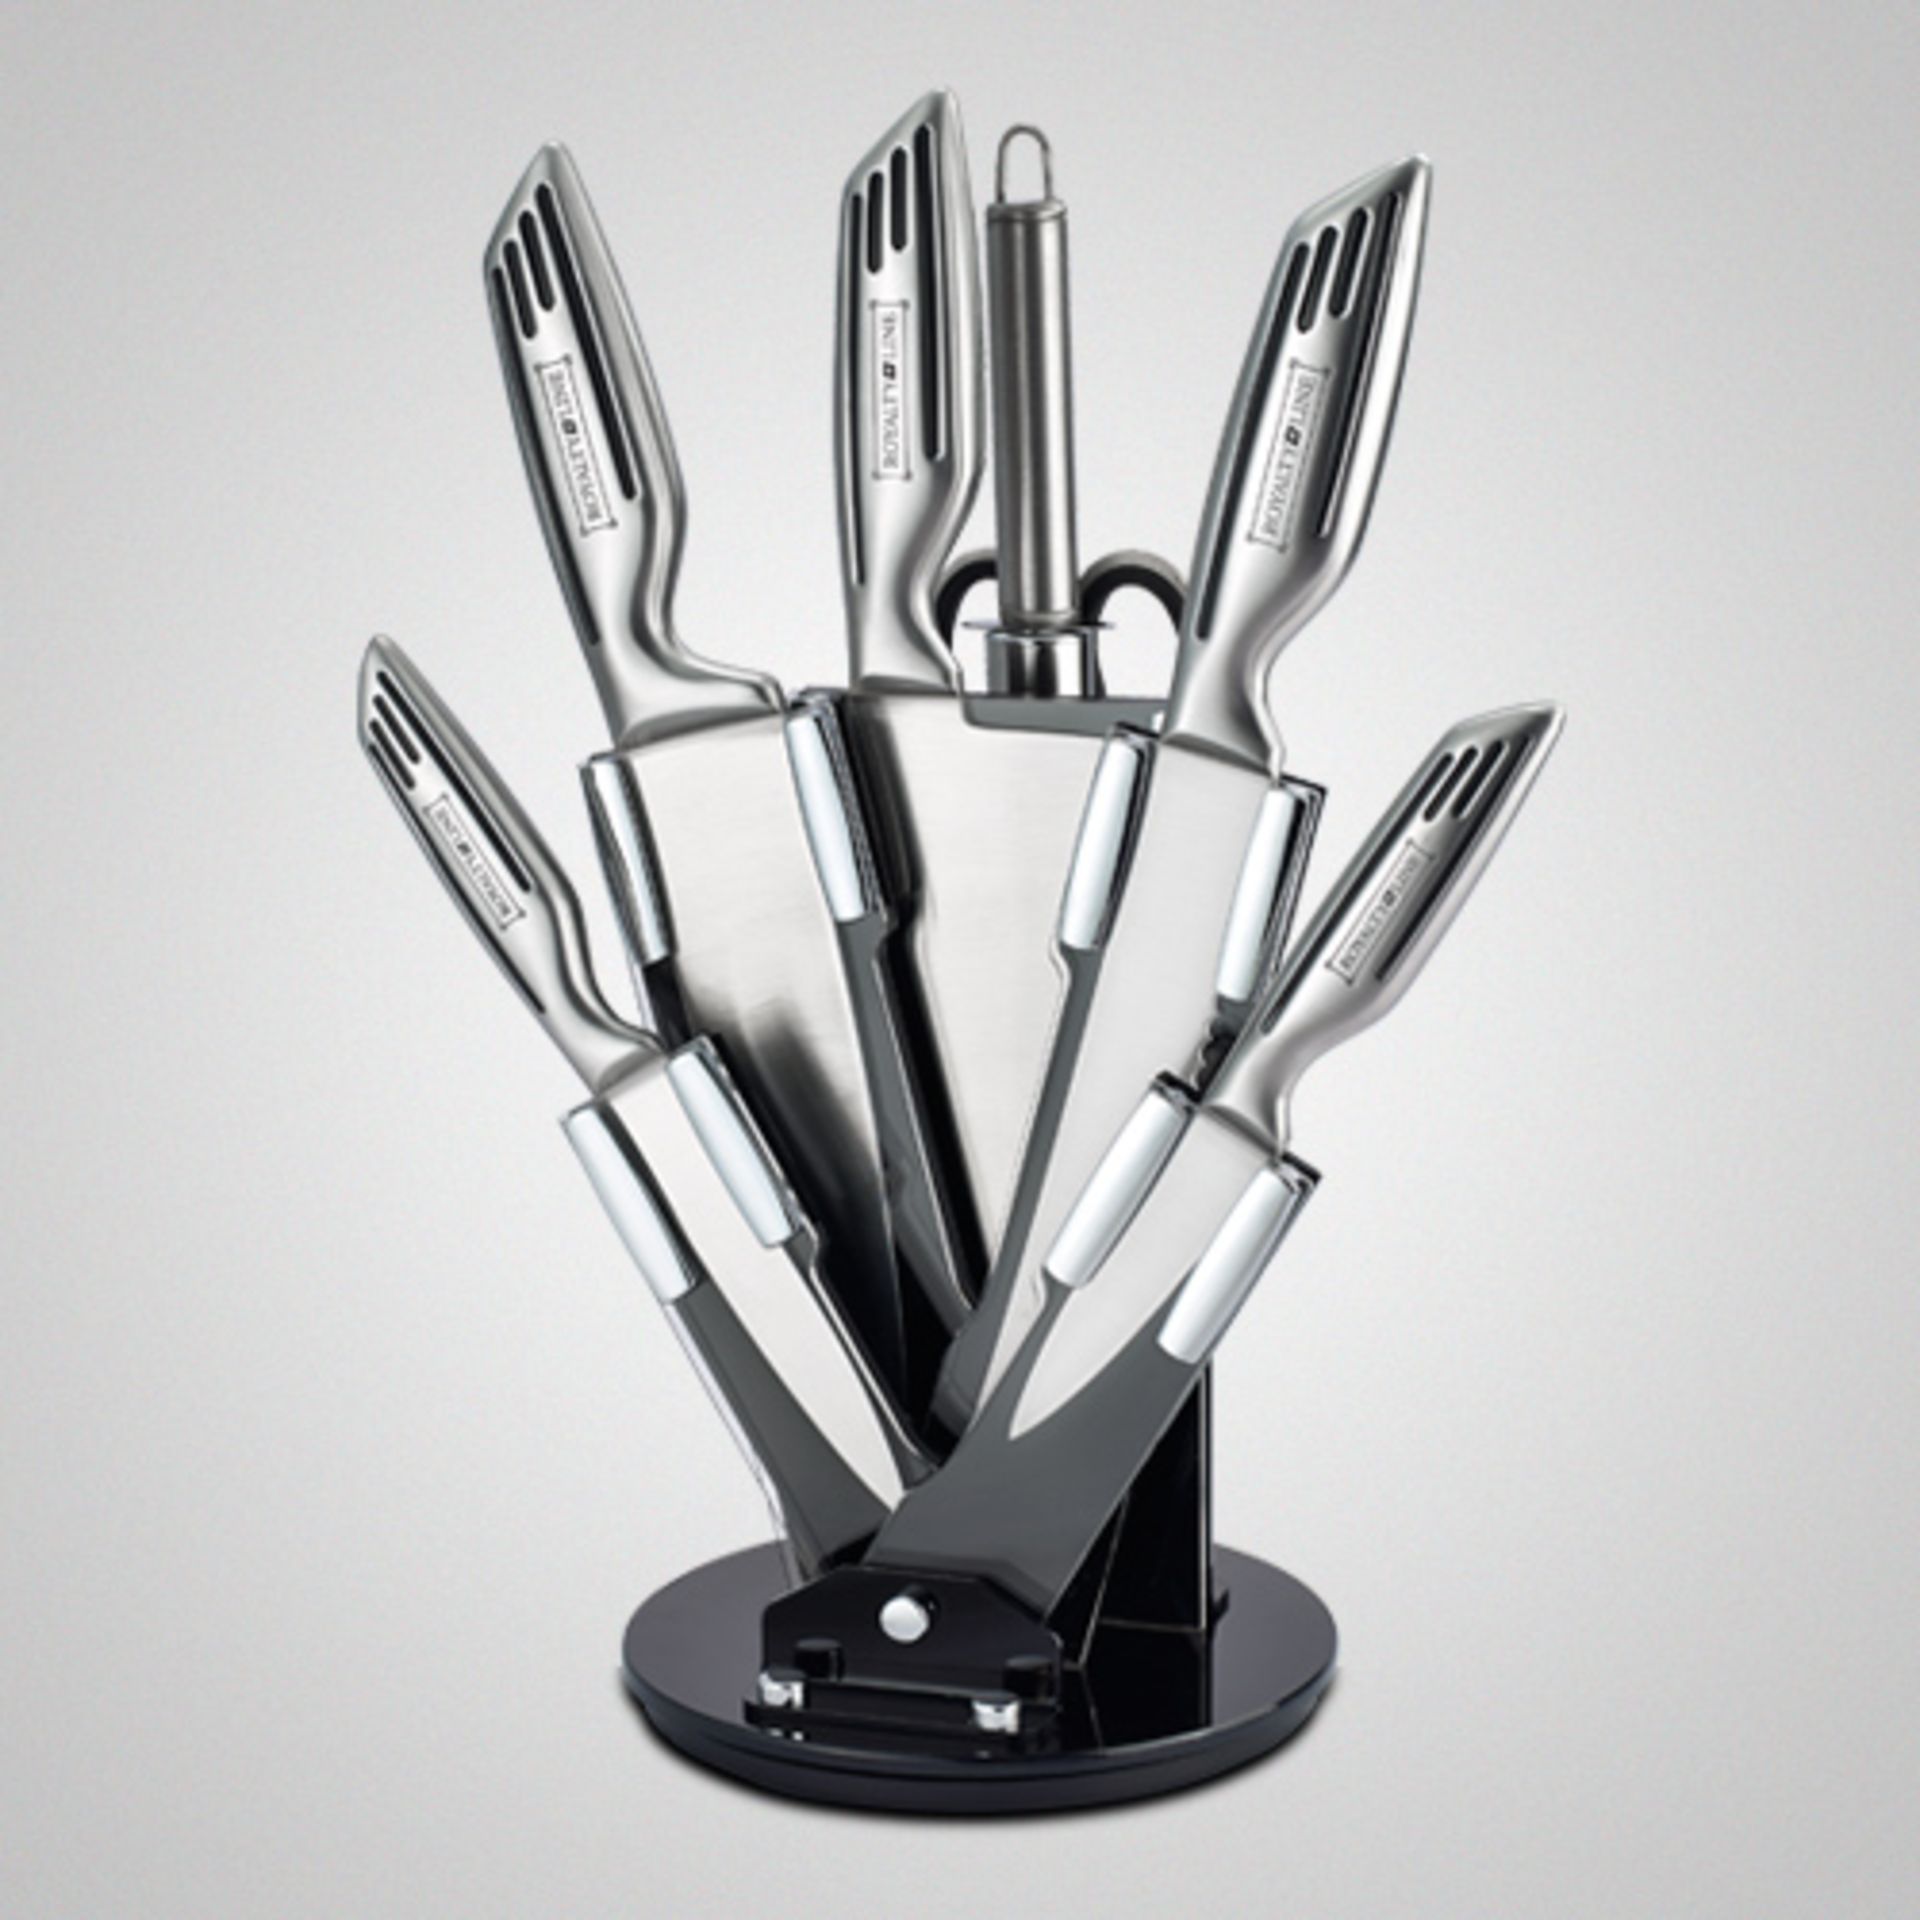 V Royalty Stainless Steel Eight Piece Kitchen Knife Set RRP 99 euros - Image 2 of 2